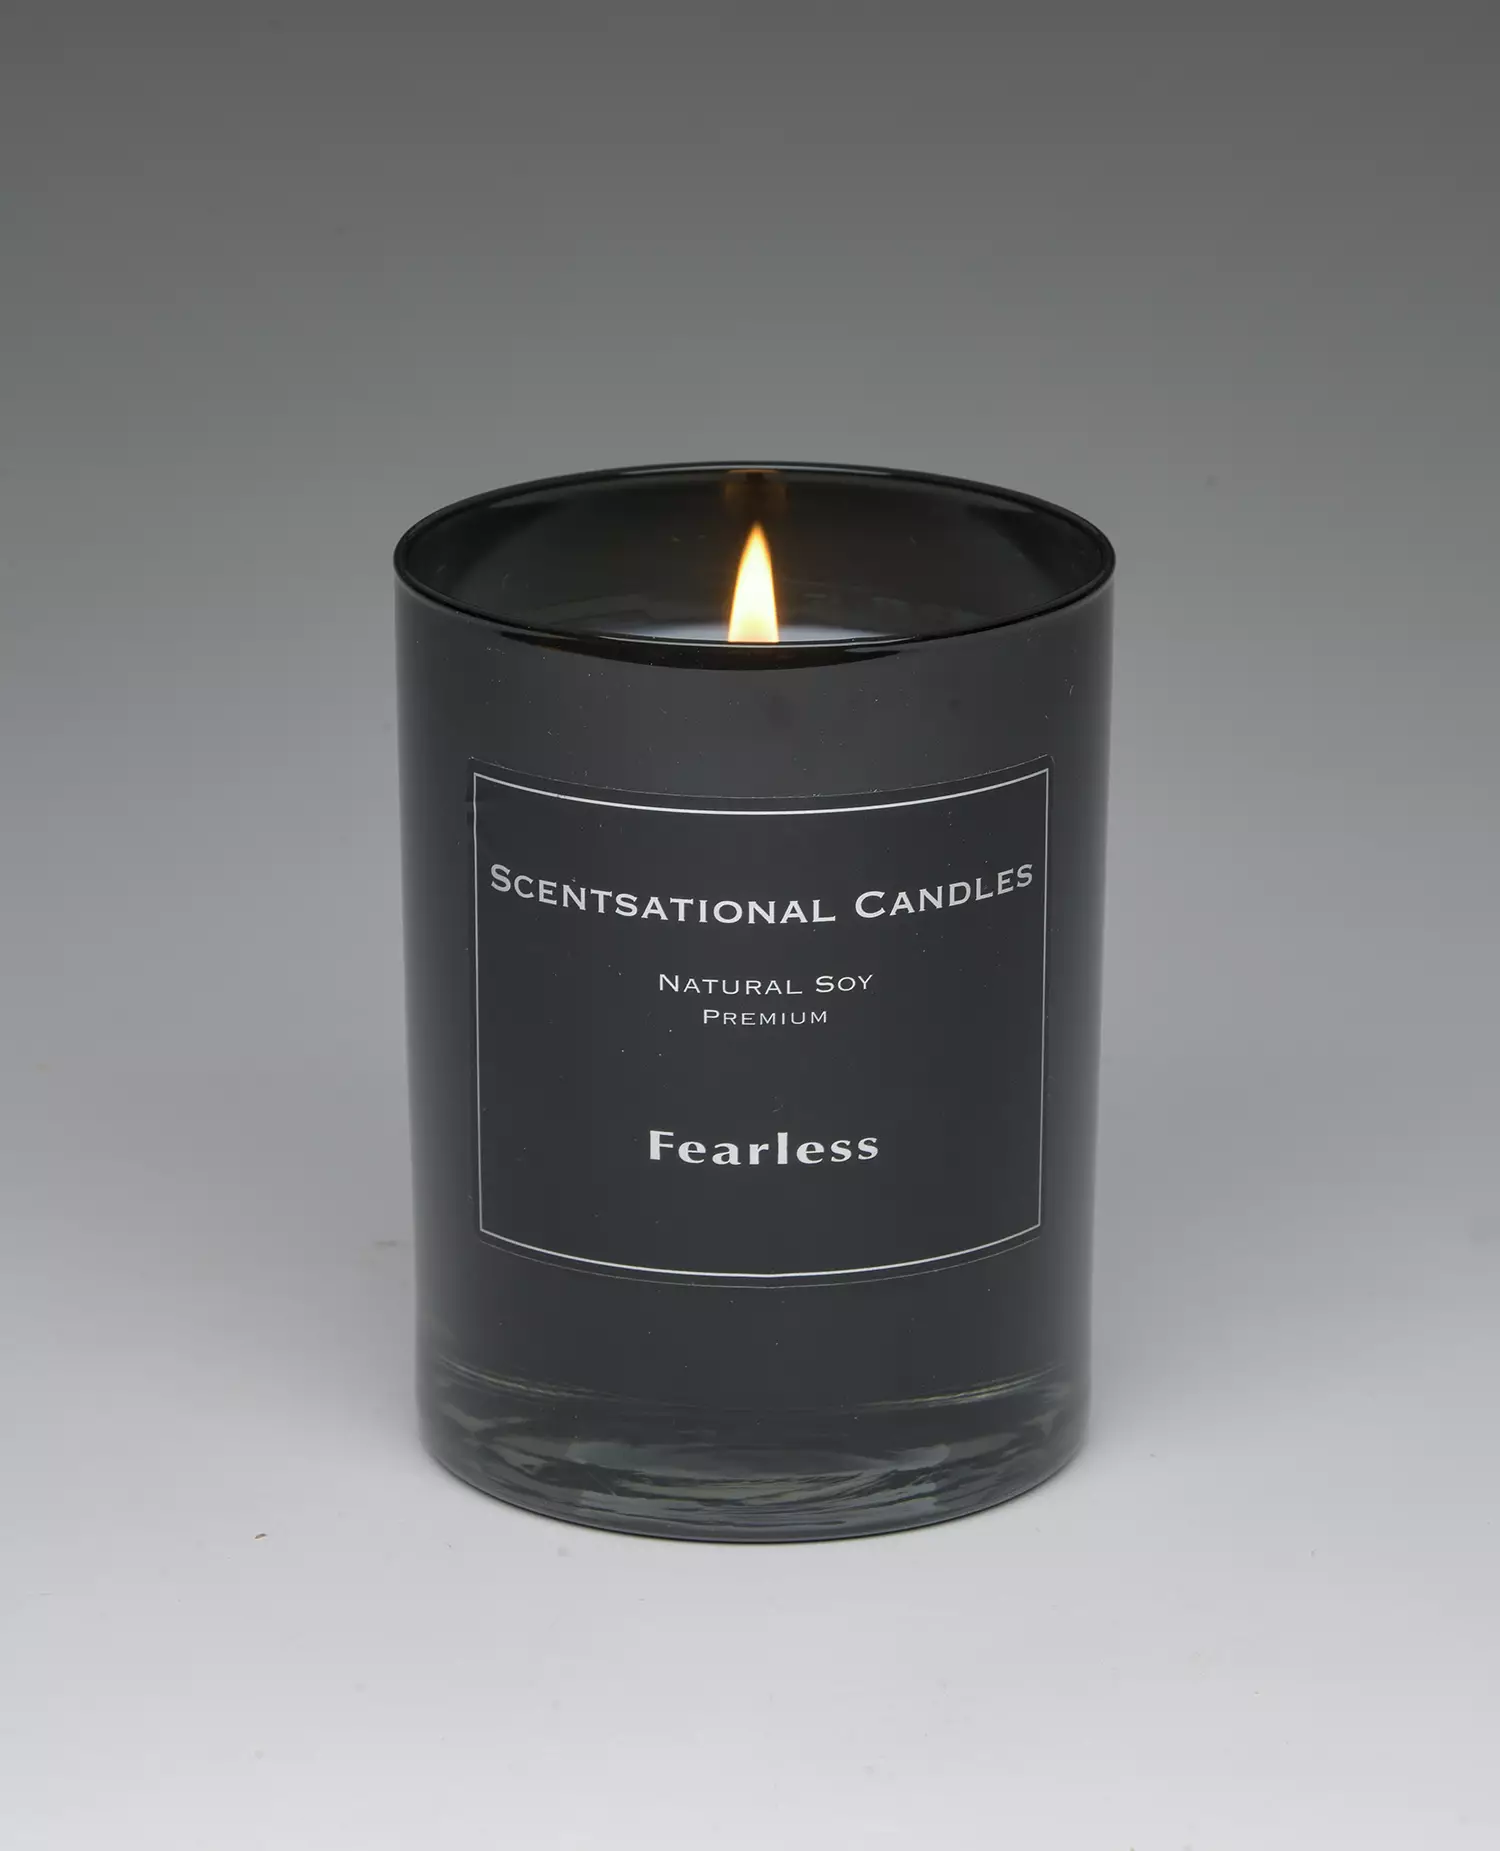 Fearless – 11oz scented candle burning